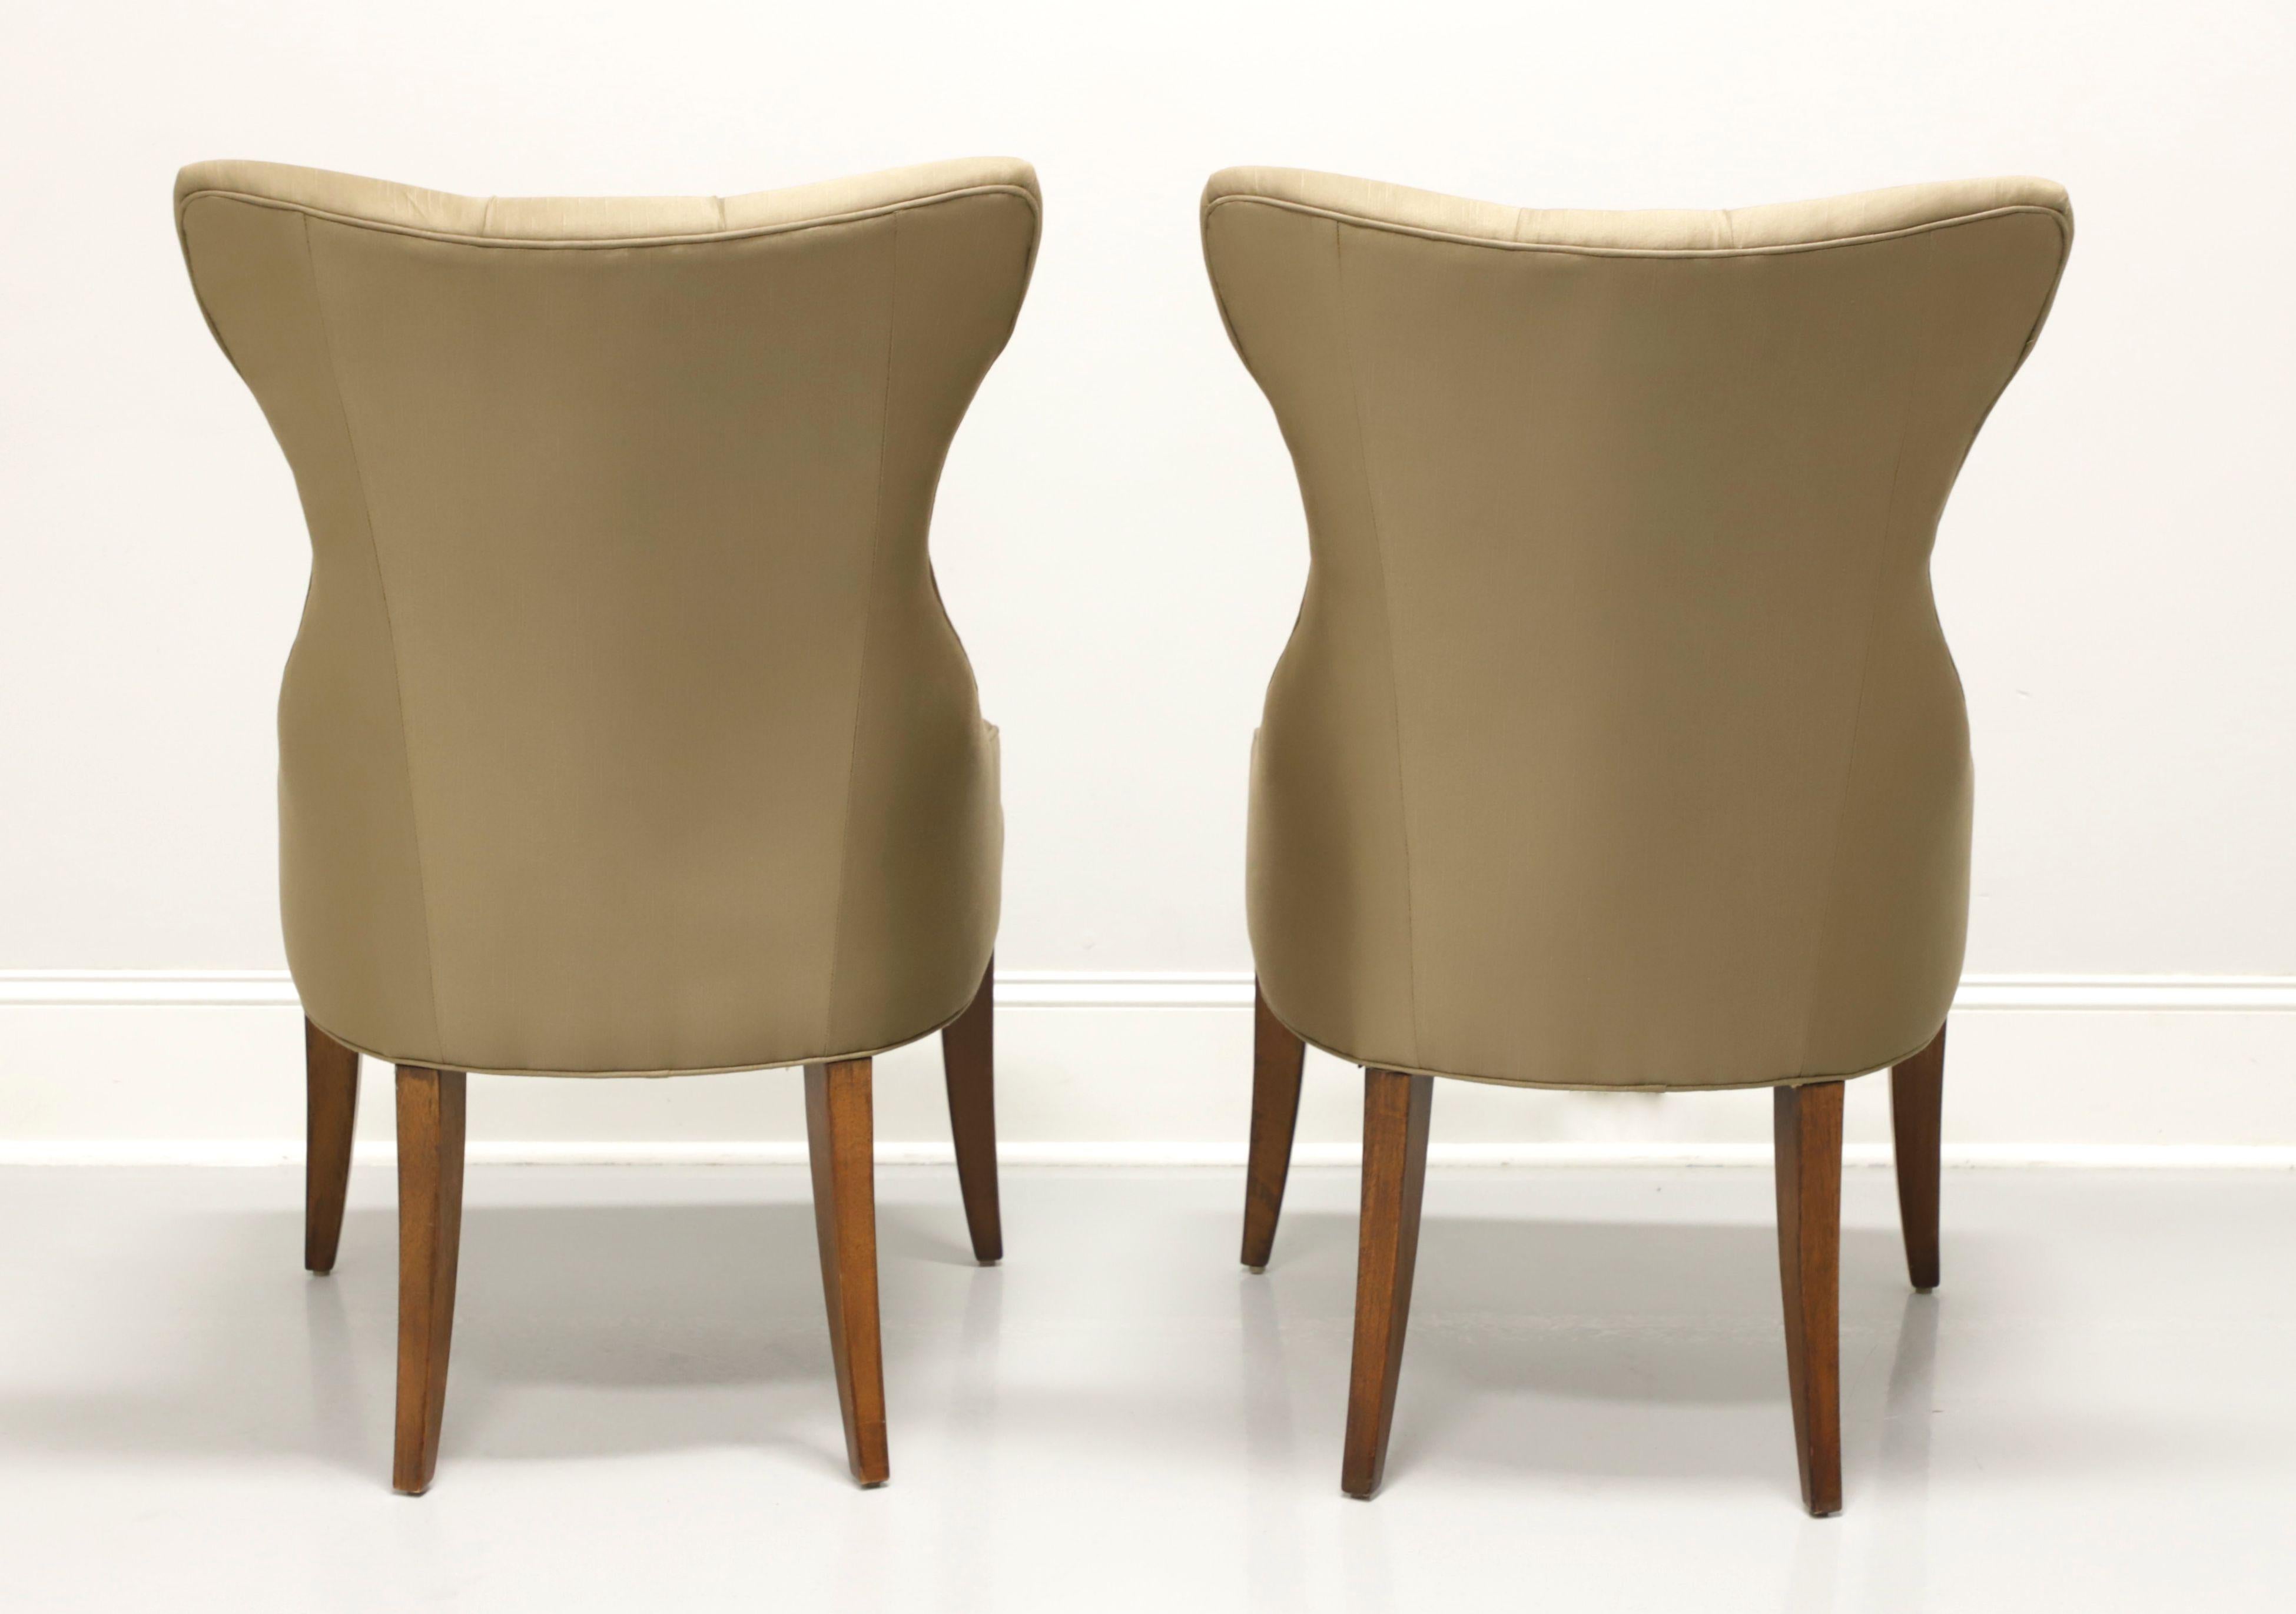 BERNHARDT Opus XIX Tufted Dining Side Chair - Pair B In Good Condition For Sale In Charlotte, NC